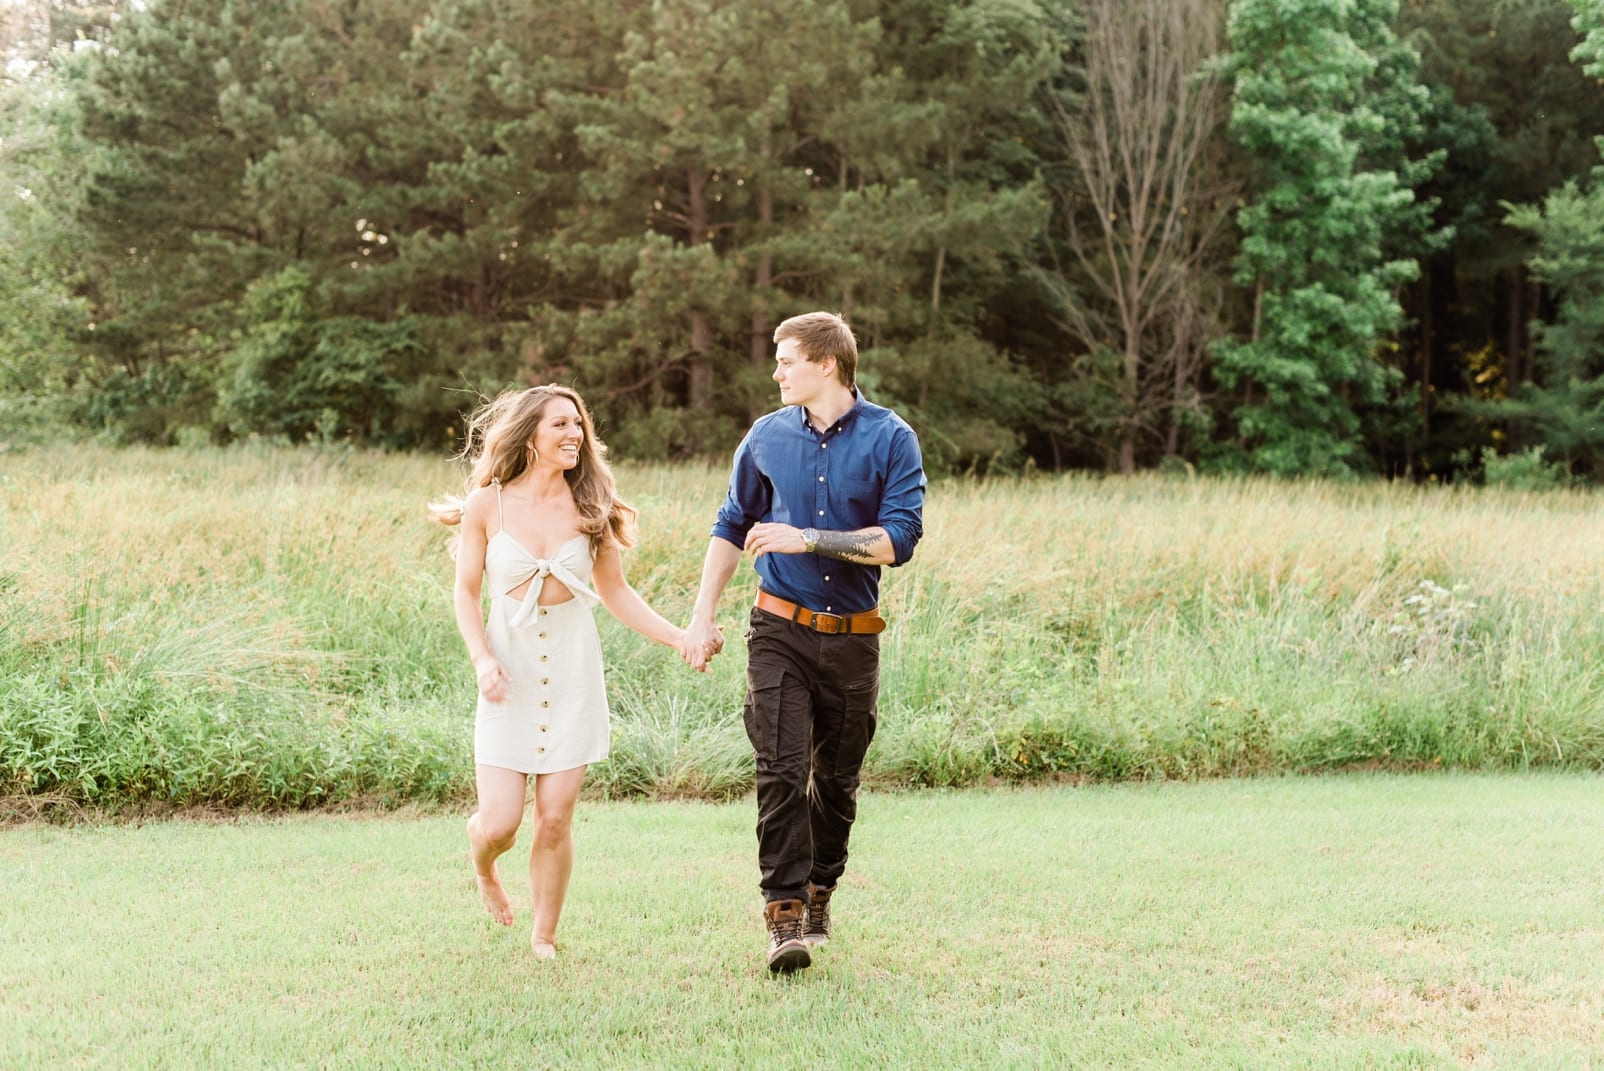 Raleigh engaged couple holding hands and running in a field photo